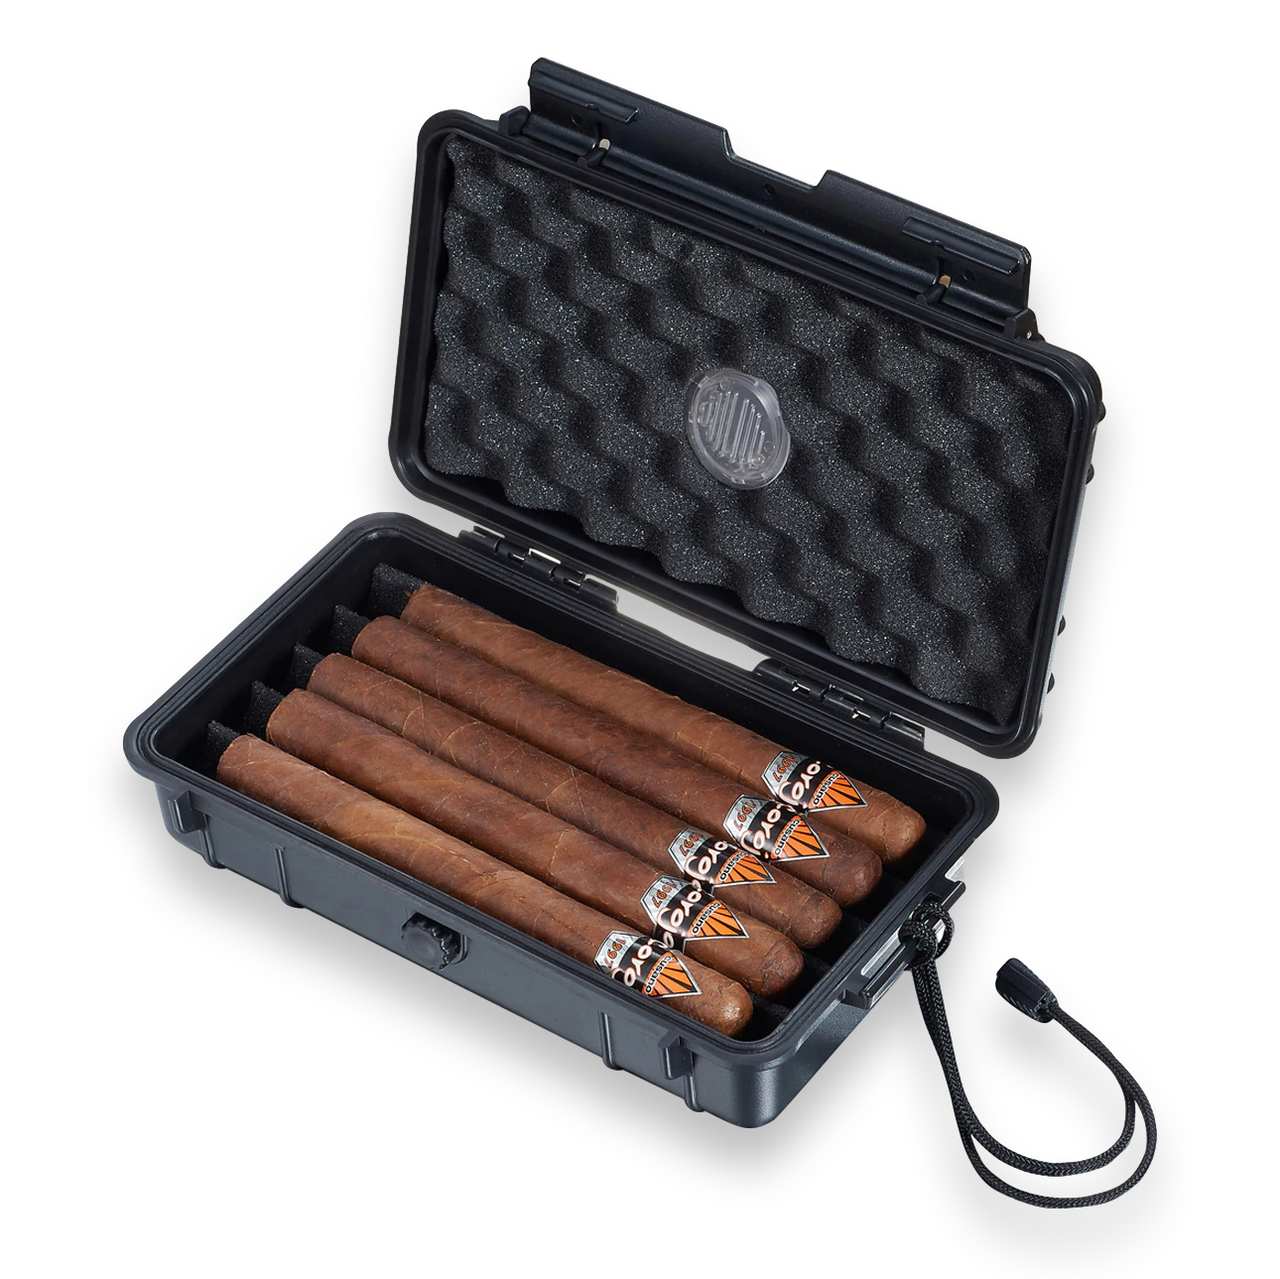 https://cdn11.bigcommerce.com/s-c63ufk/images/stencil/1280x1280/products/1491/7659/Visol-Wyatt-Hard-Plastic-5-Cigar-Travel-Humidor-VHUD728-Interior-with-Cigars-1_clipped_rev_1__53167.1615156440.png?c=2?imbypass=on